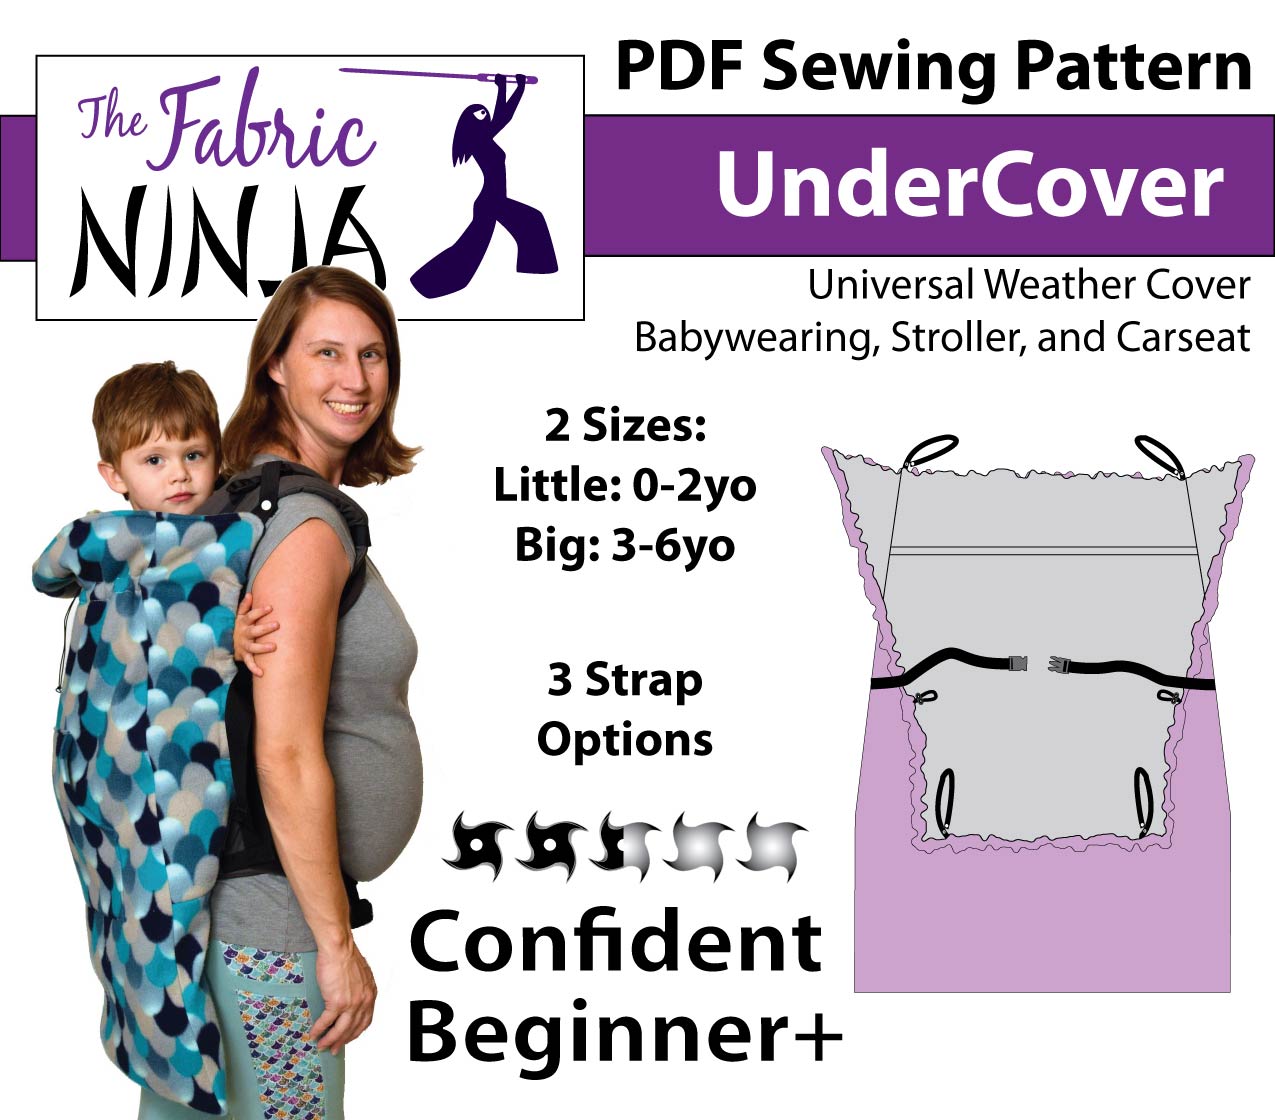 Pregnant mom wears toddler on her back who is keeping warm in the Under Cover universal weather cover. PDF Sewing Pattern for universal weather cover Babywearing, stroller, and carseat. 2 sizes: little kid and big kid. 3 strap options for confident beginner +